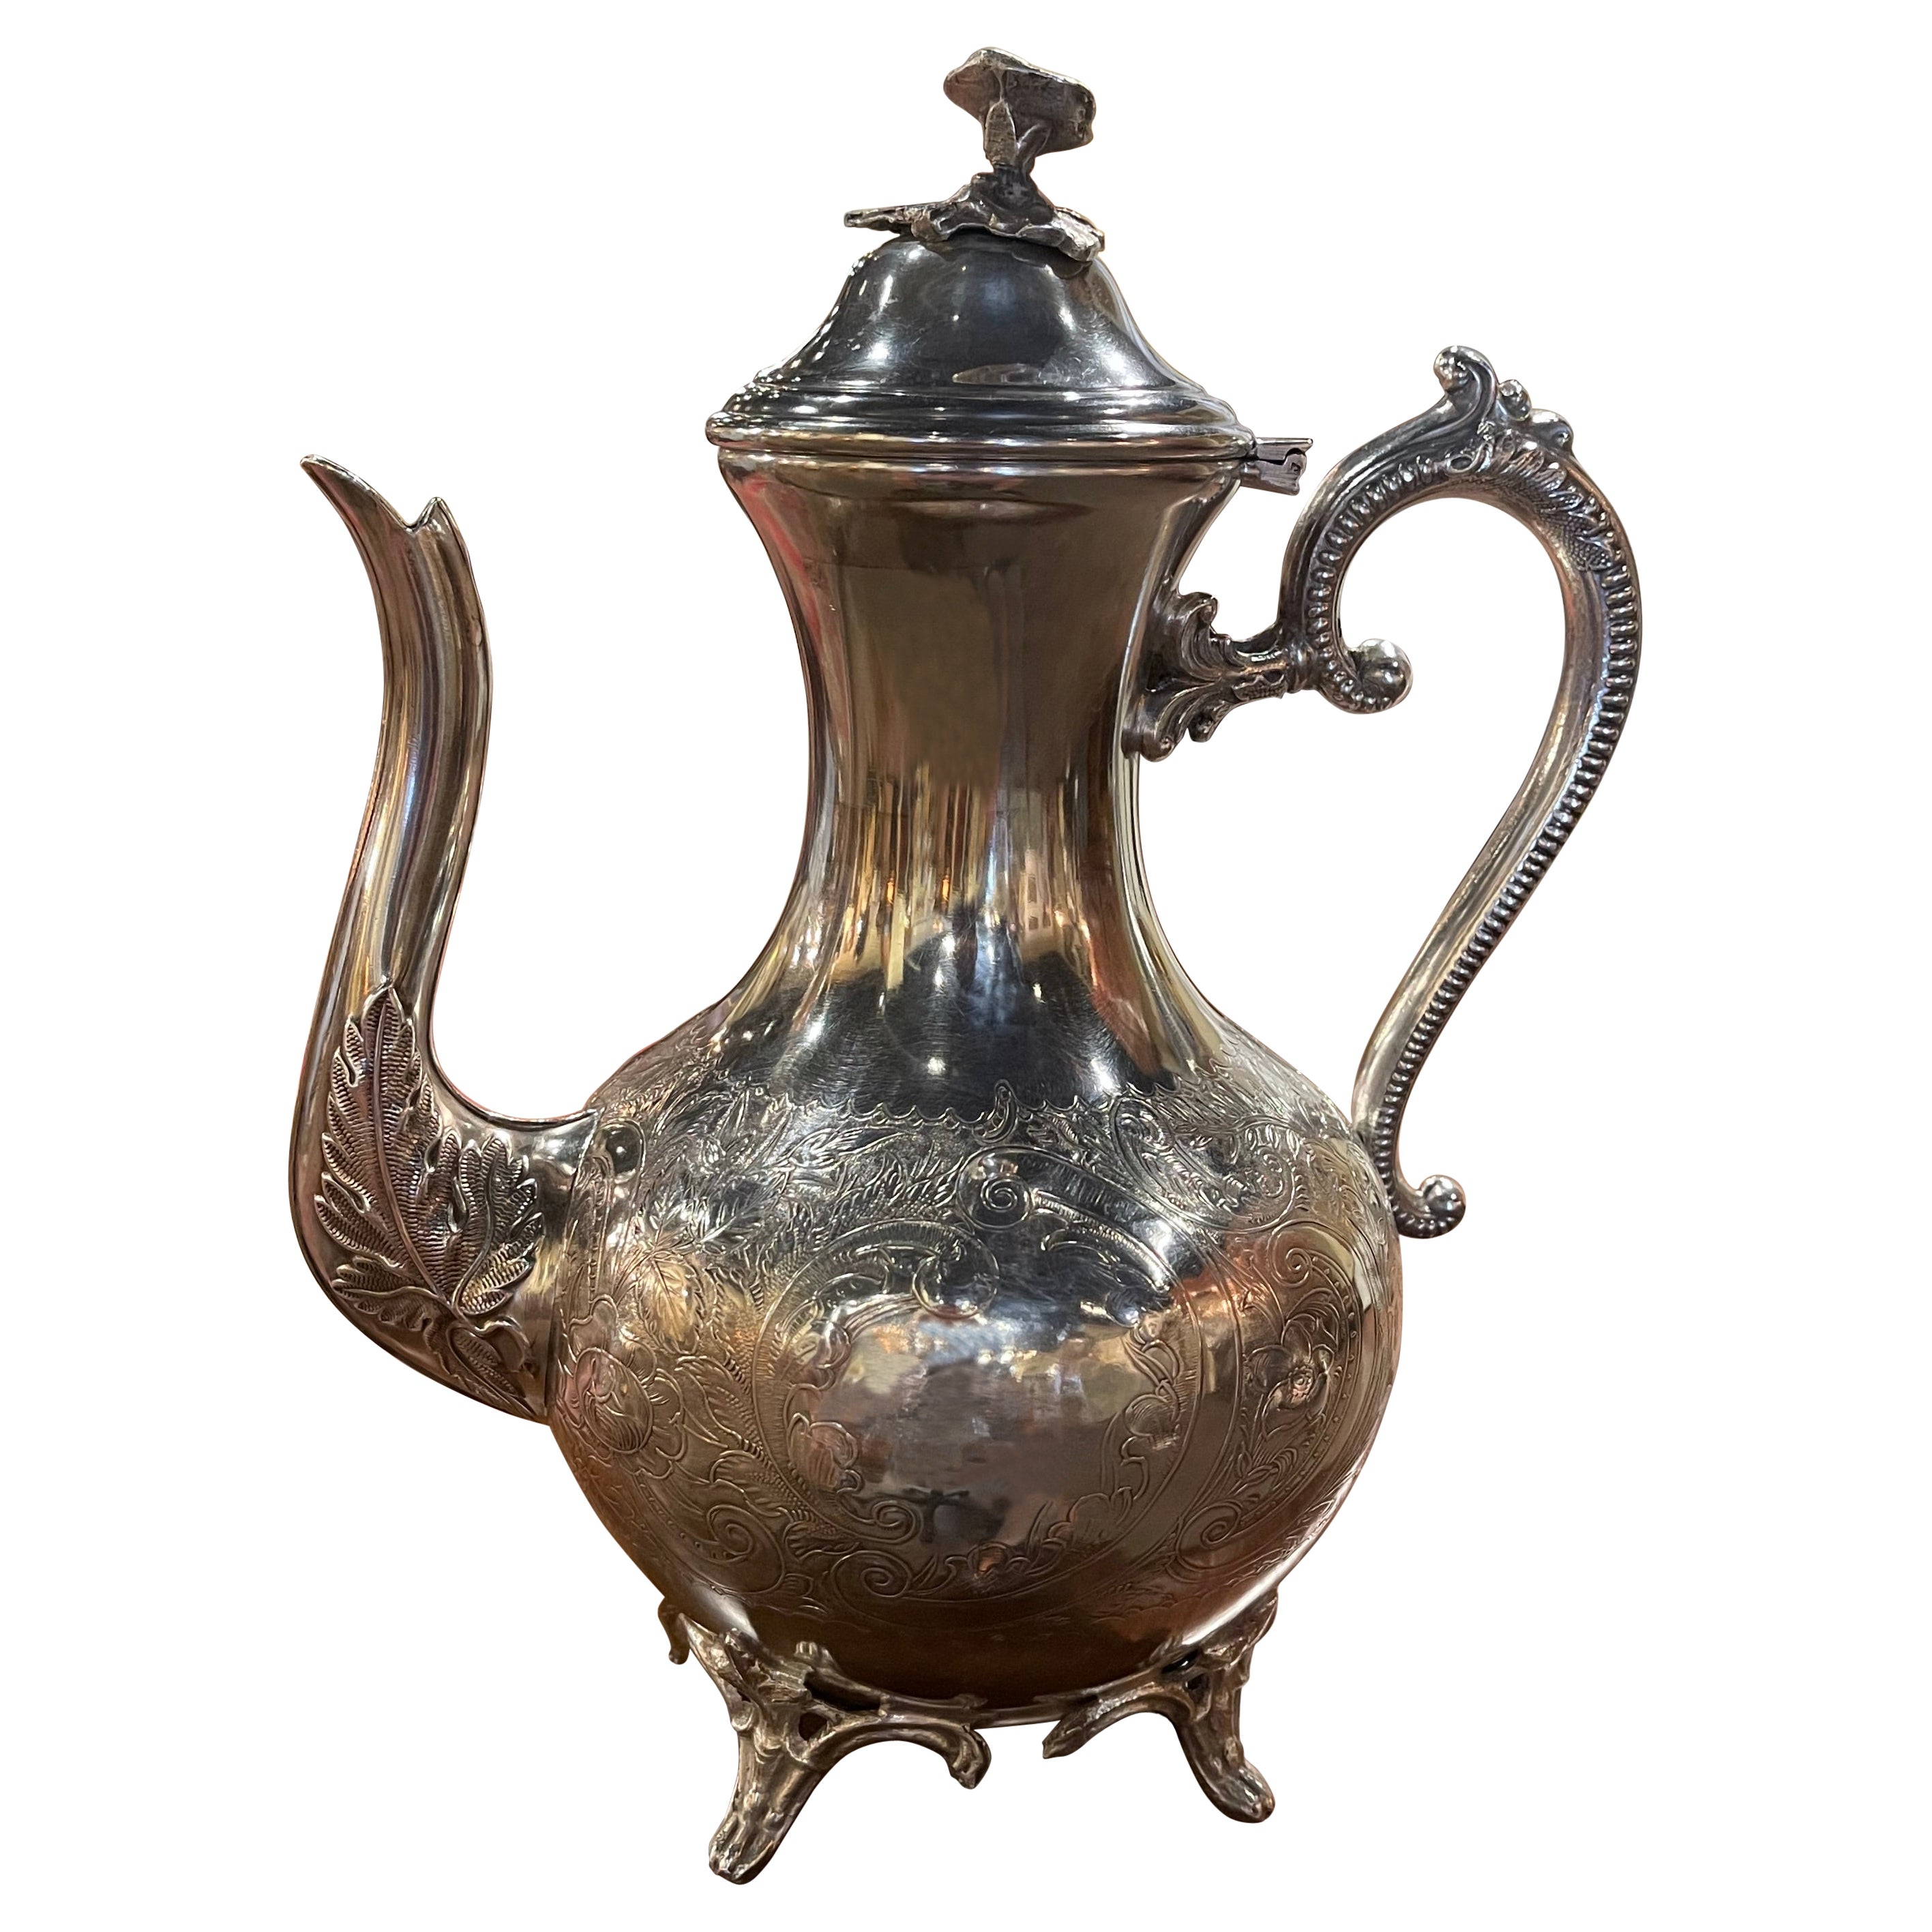 Early 20th Century French Silver Plated Teapot or Coffeepot with Engraved Motifs